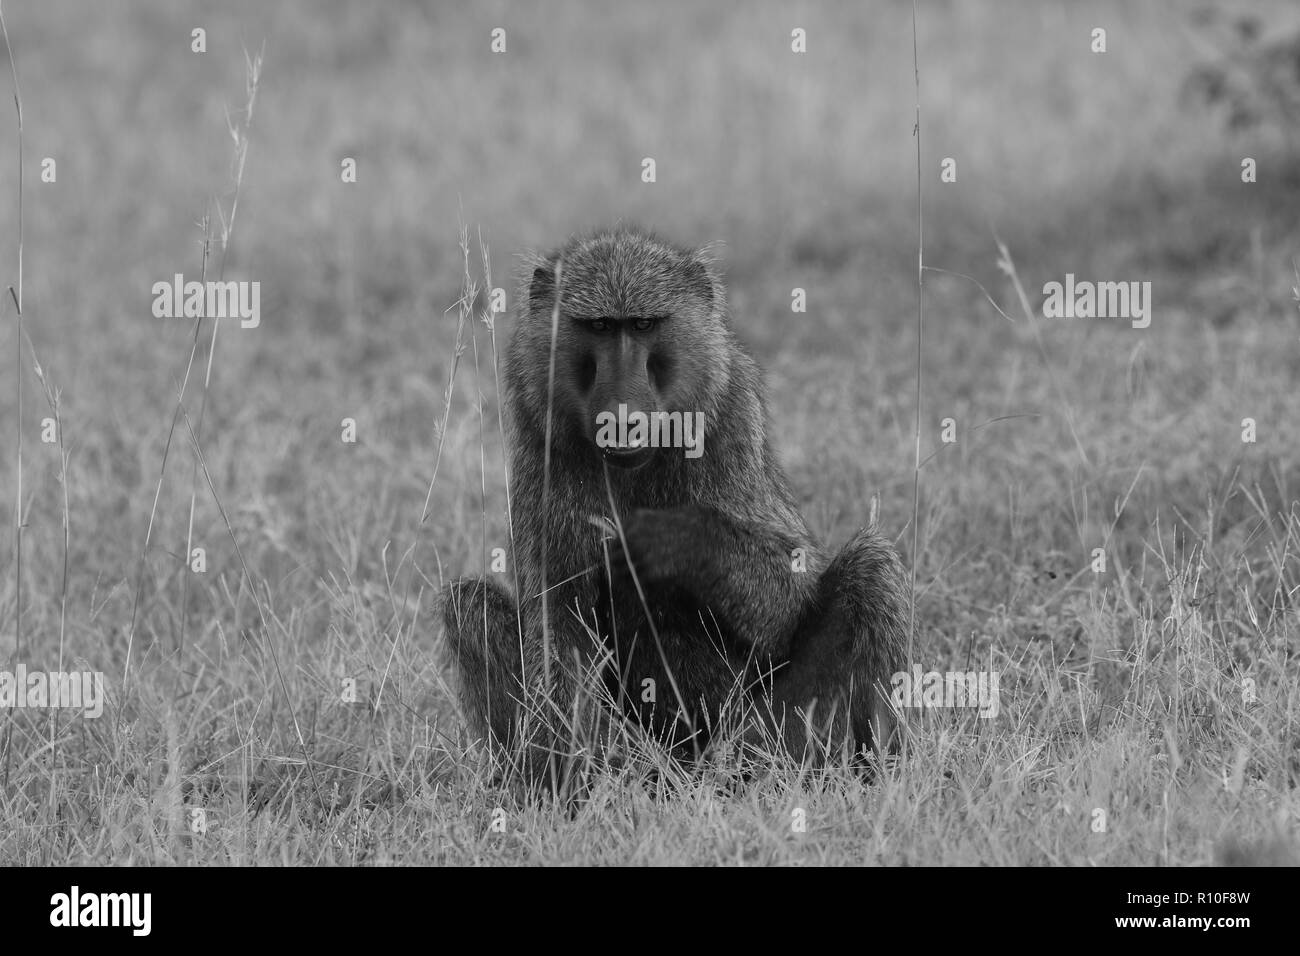 1 one Single Olive Baboon (Papio anubis) looking at camera grinning sitting in grass black and white Murchison Falls Park Uganda Stock Photo